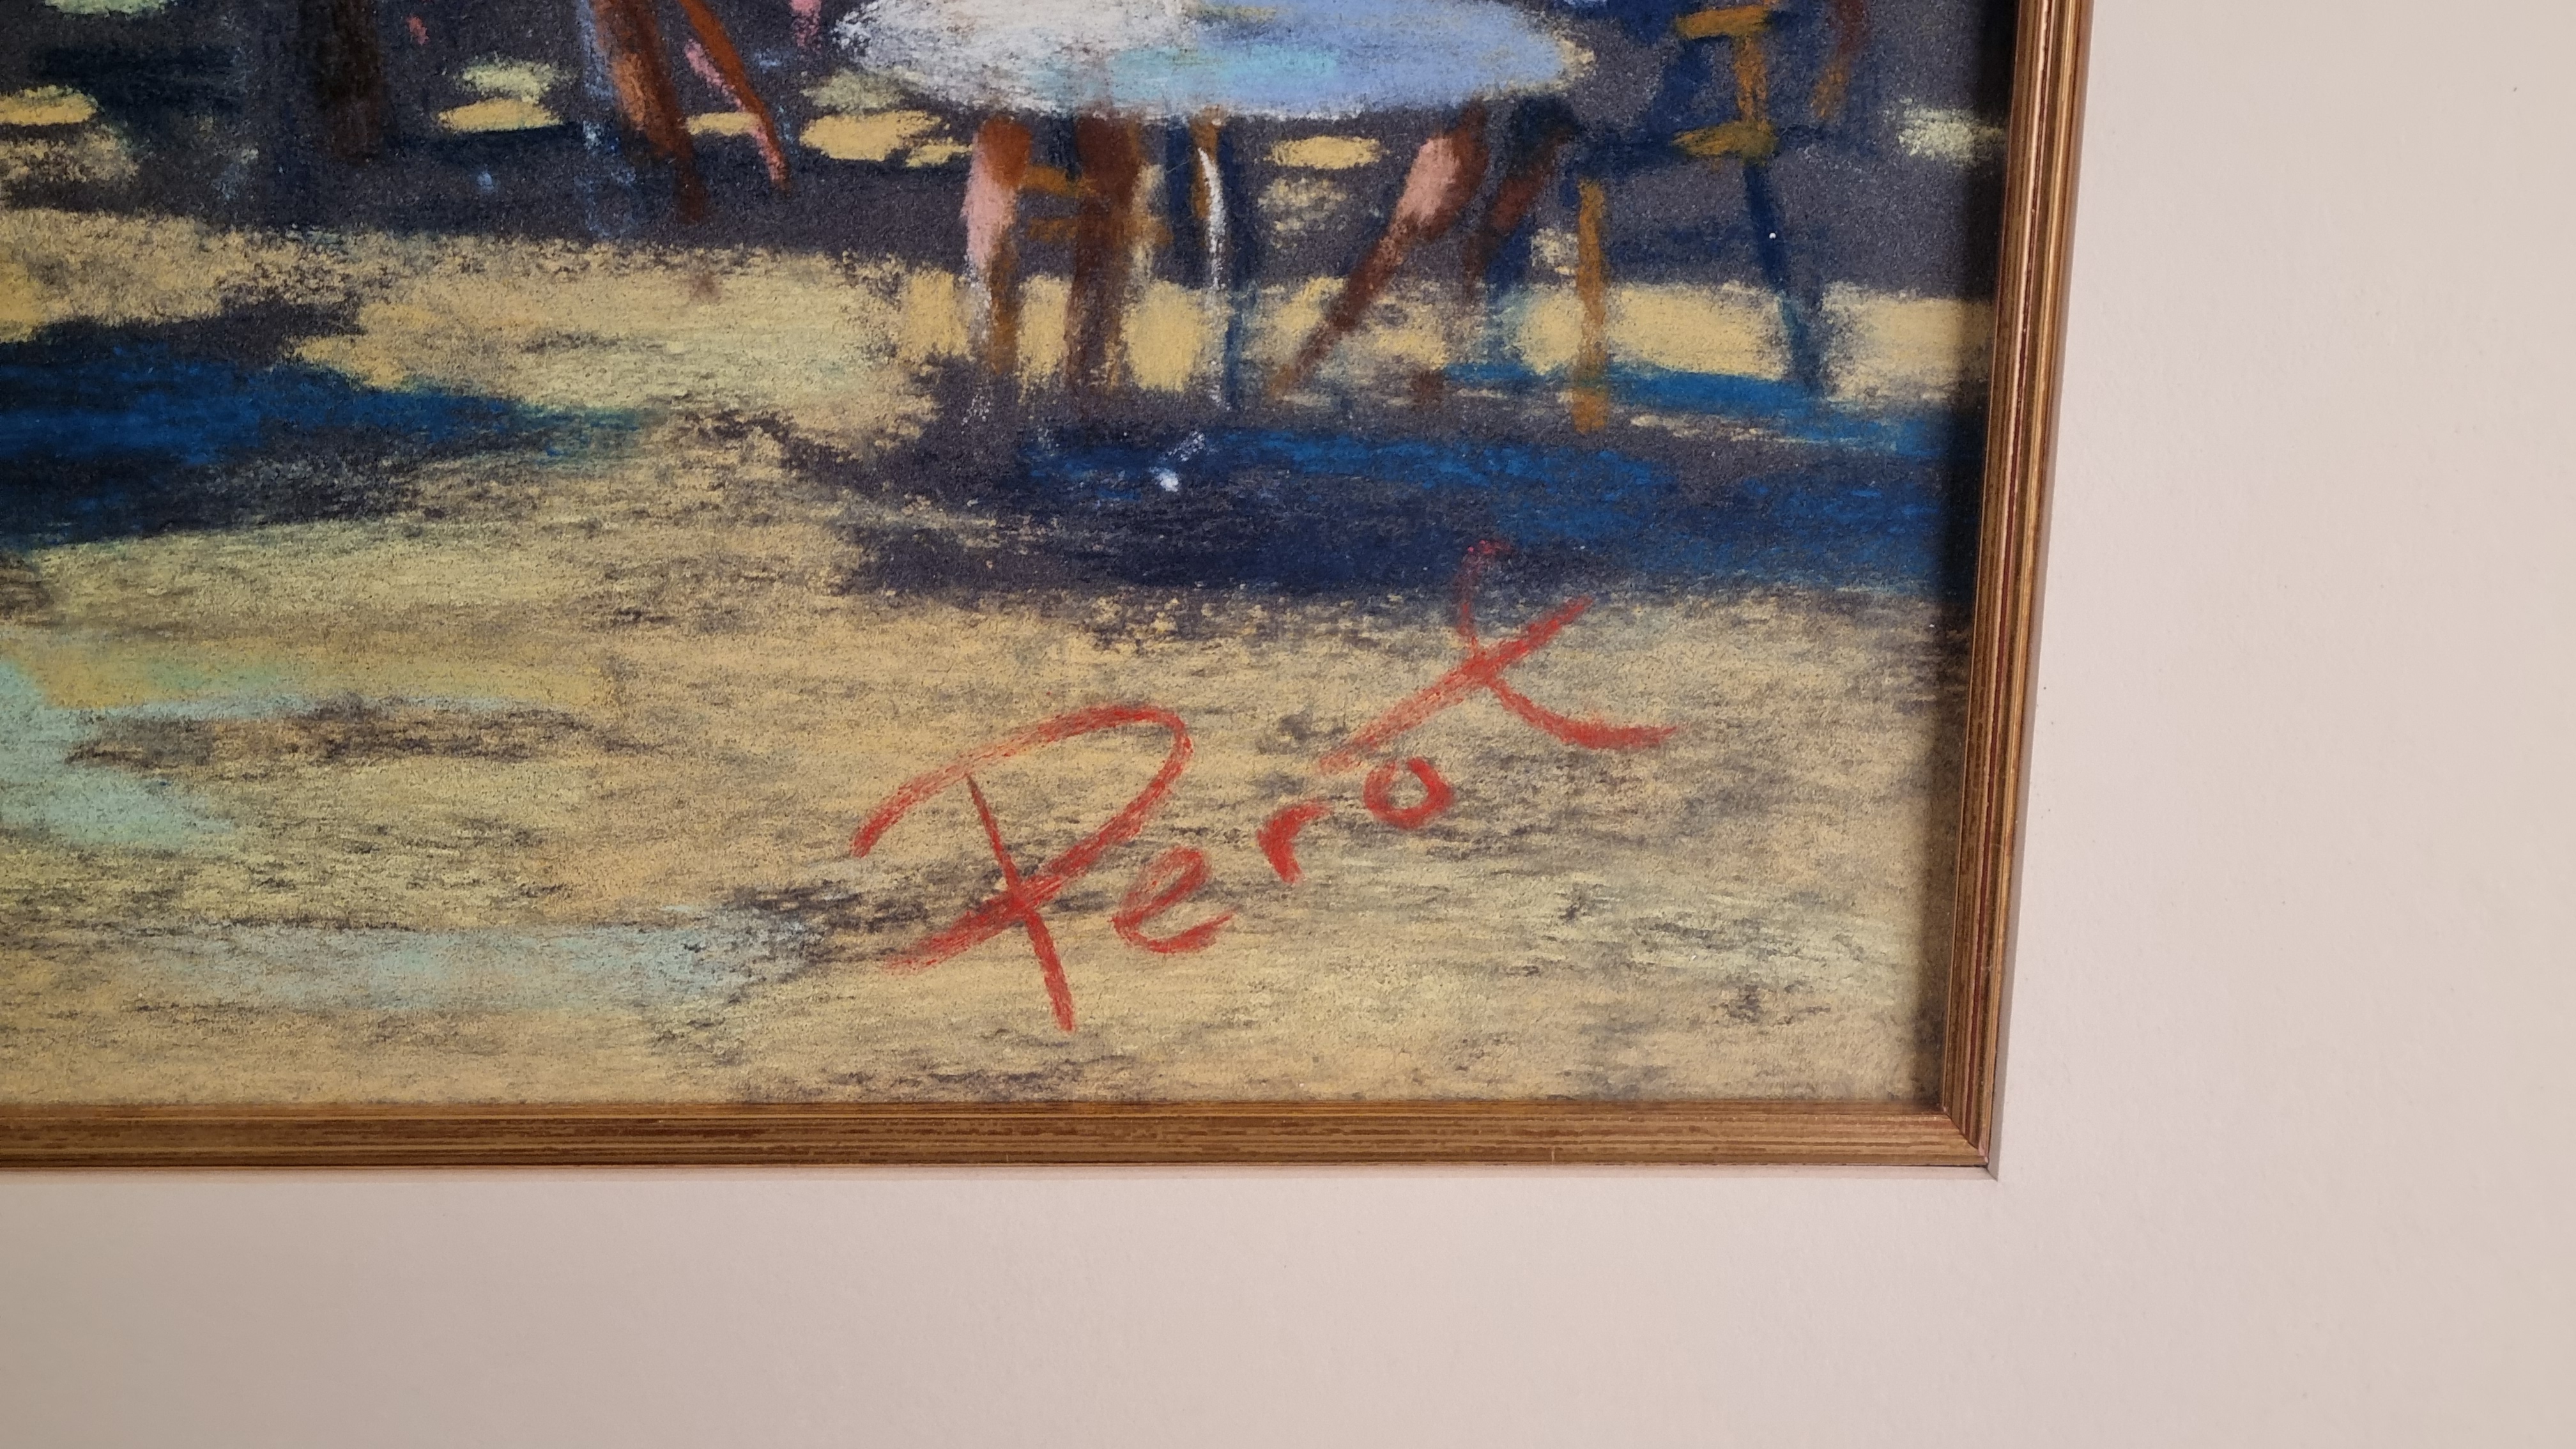 Original Framed Pastel Painting by Perot - Image 4 of 7